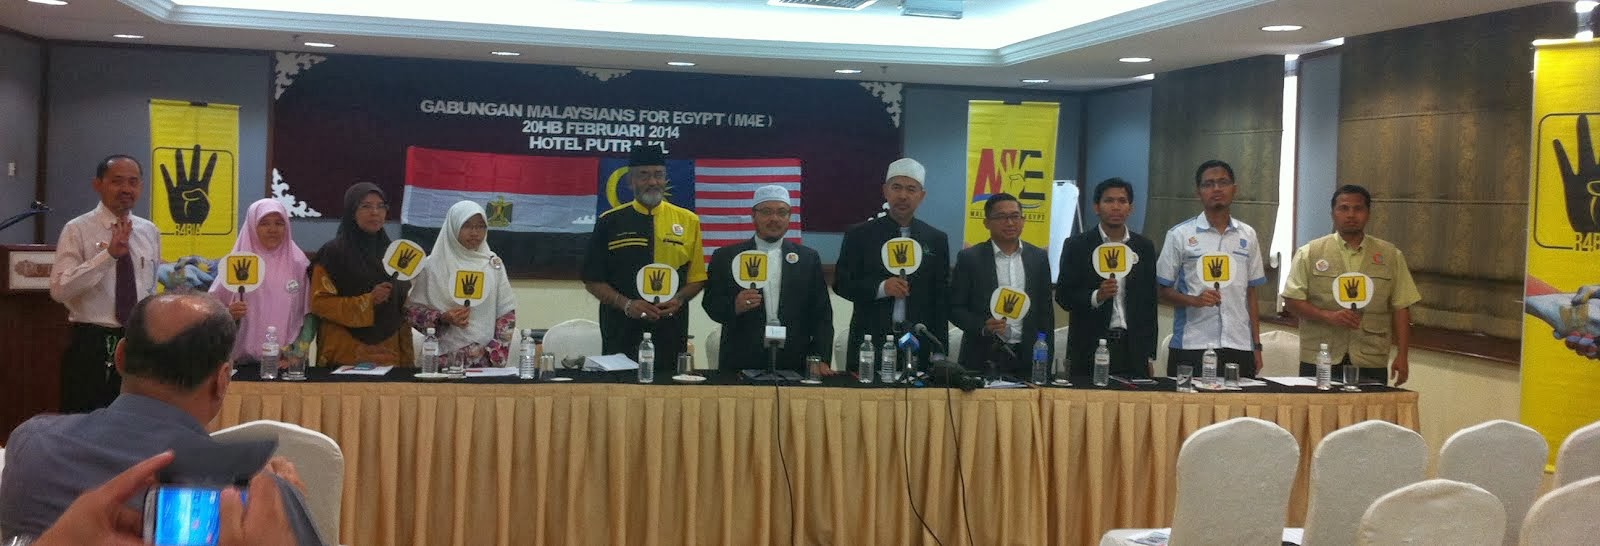 MALAYSIA MUST SUPPORT TURKEY DENOUNCE ZIONIST CC MILITARY COUP IN EGYPT !!